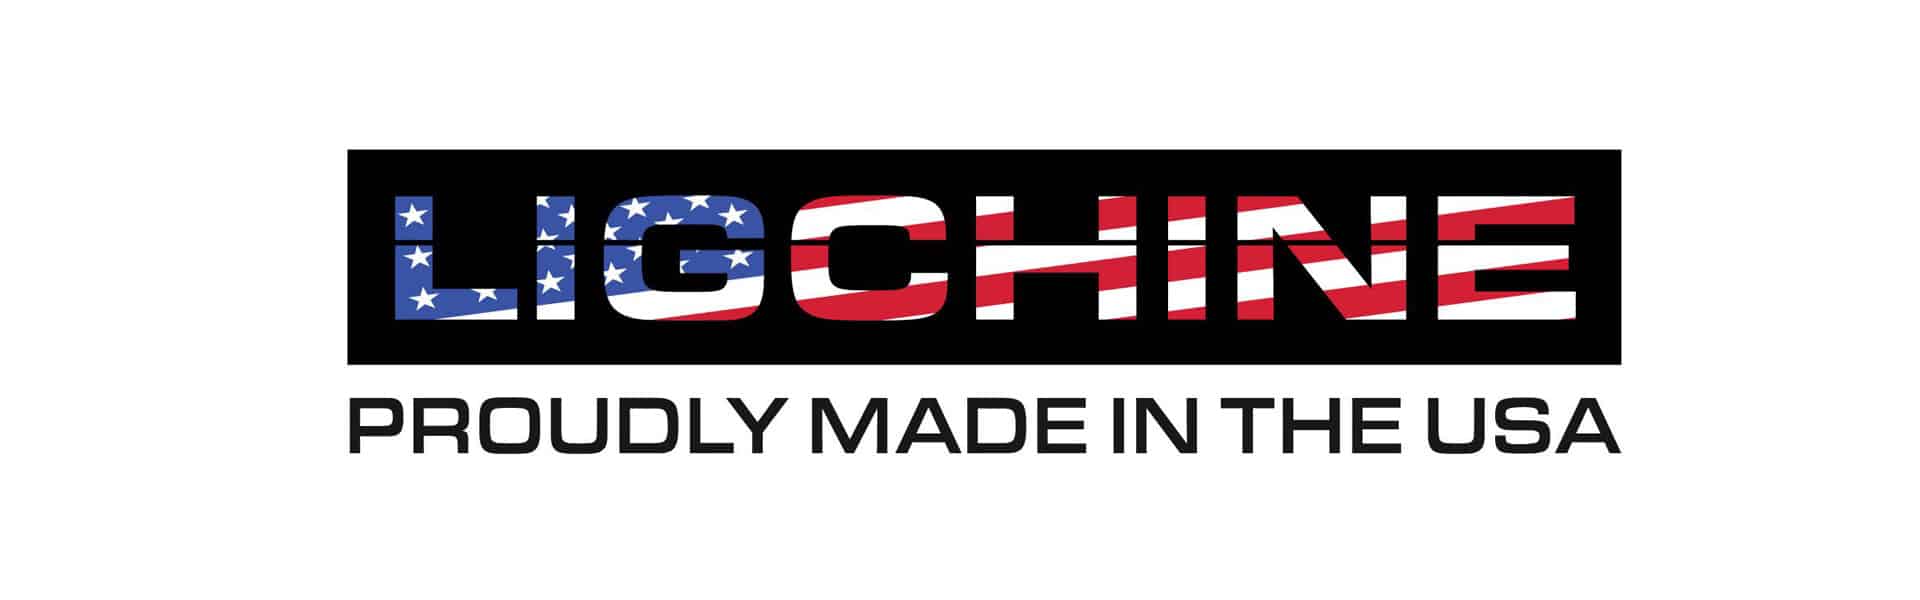 Ligchine-Made-in-the-USA